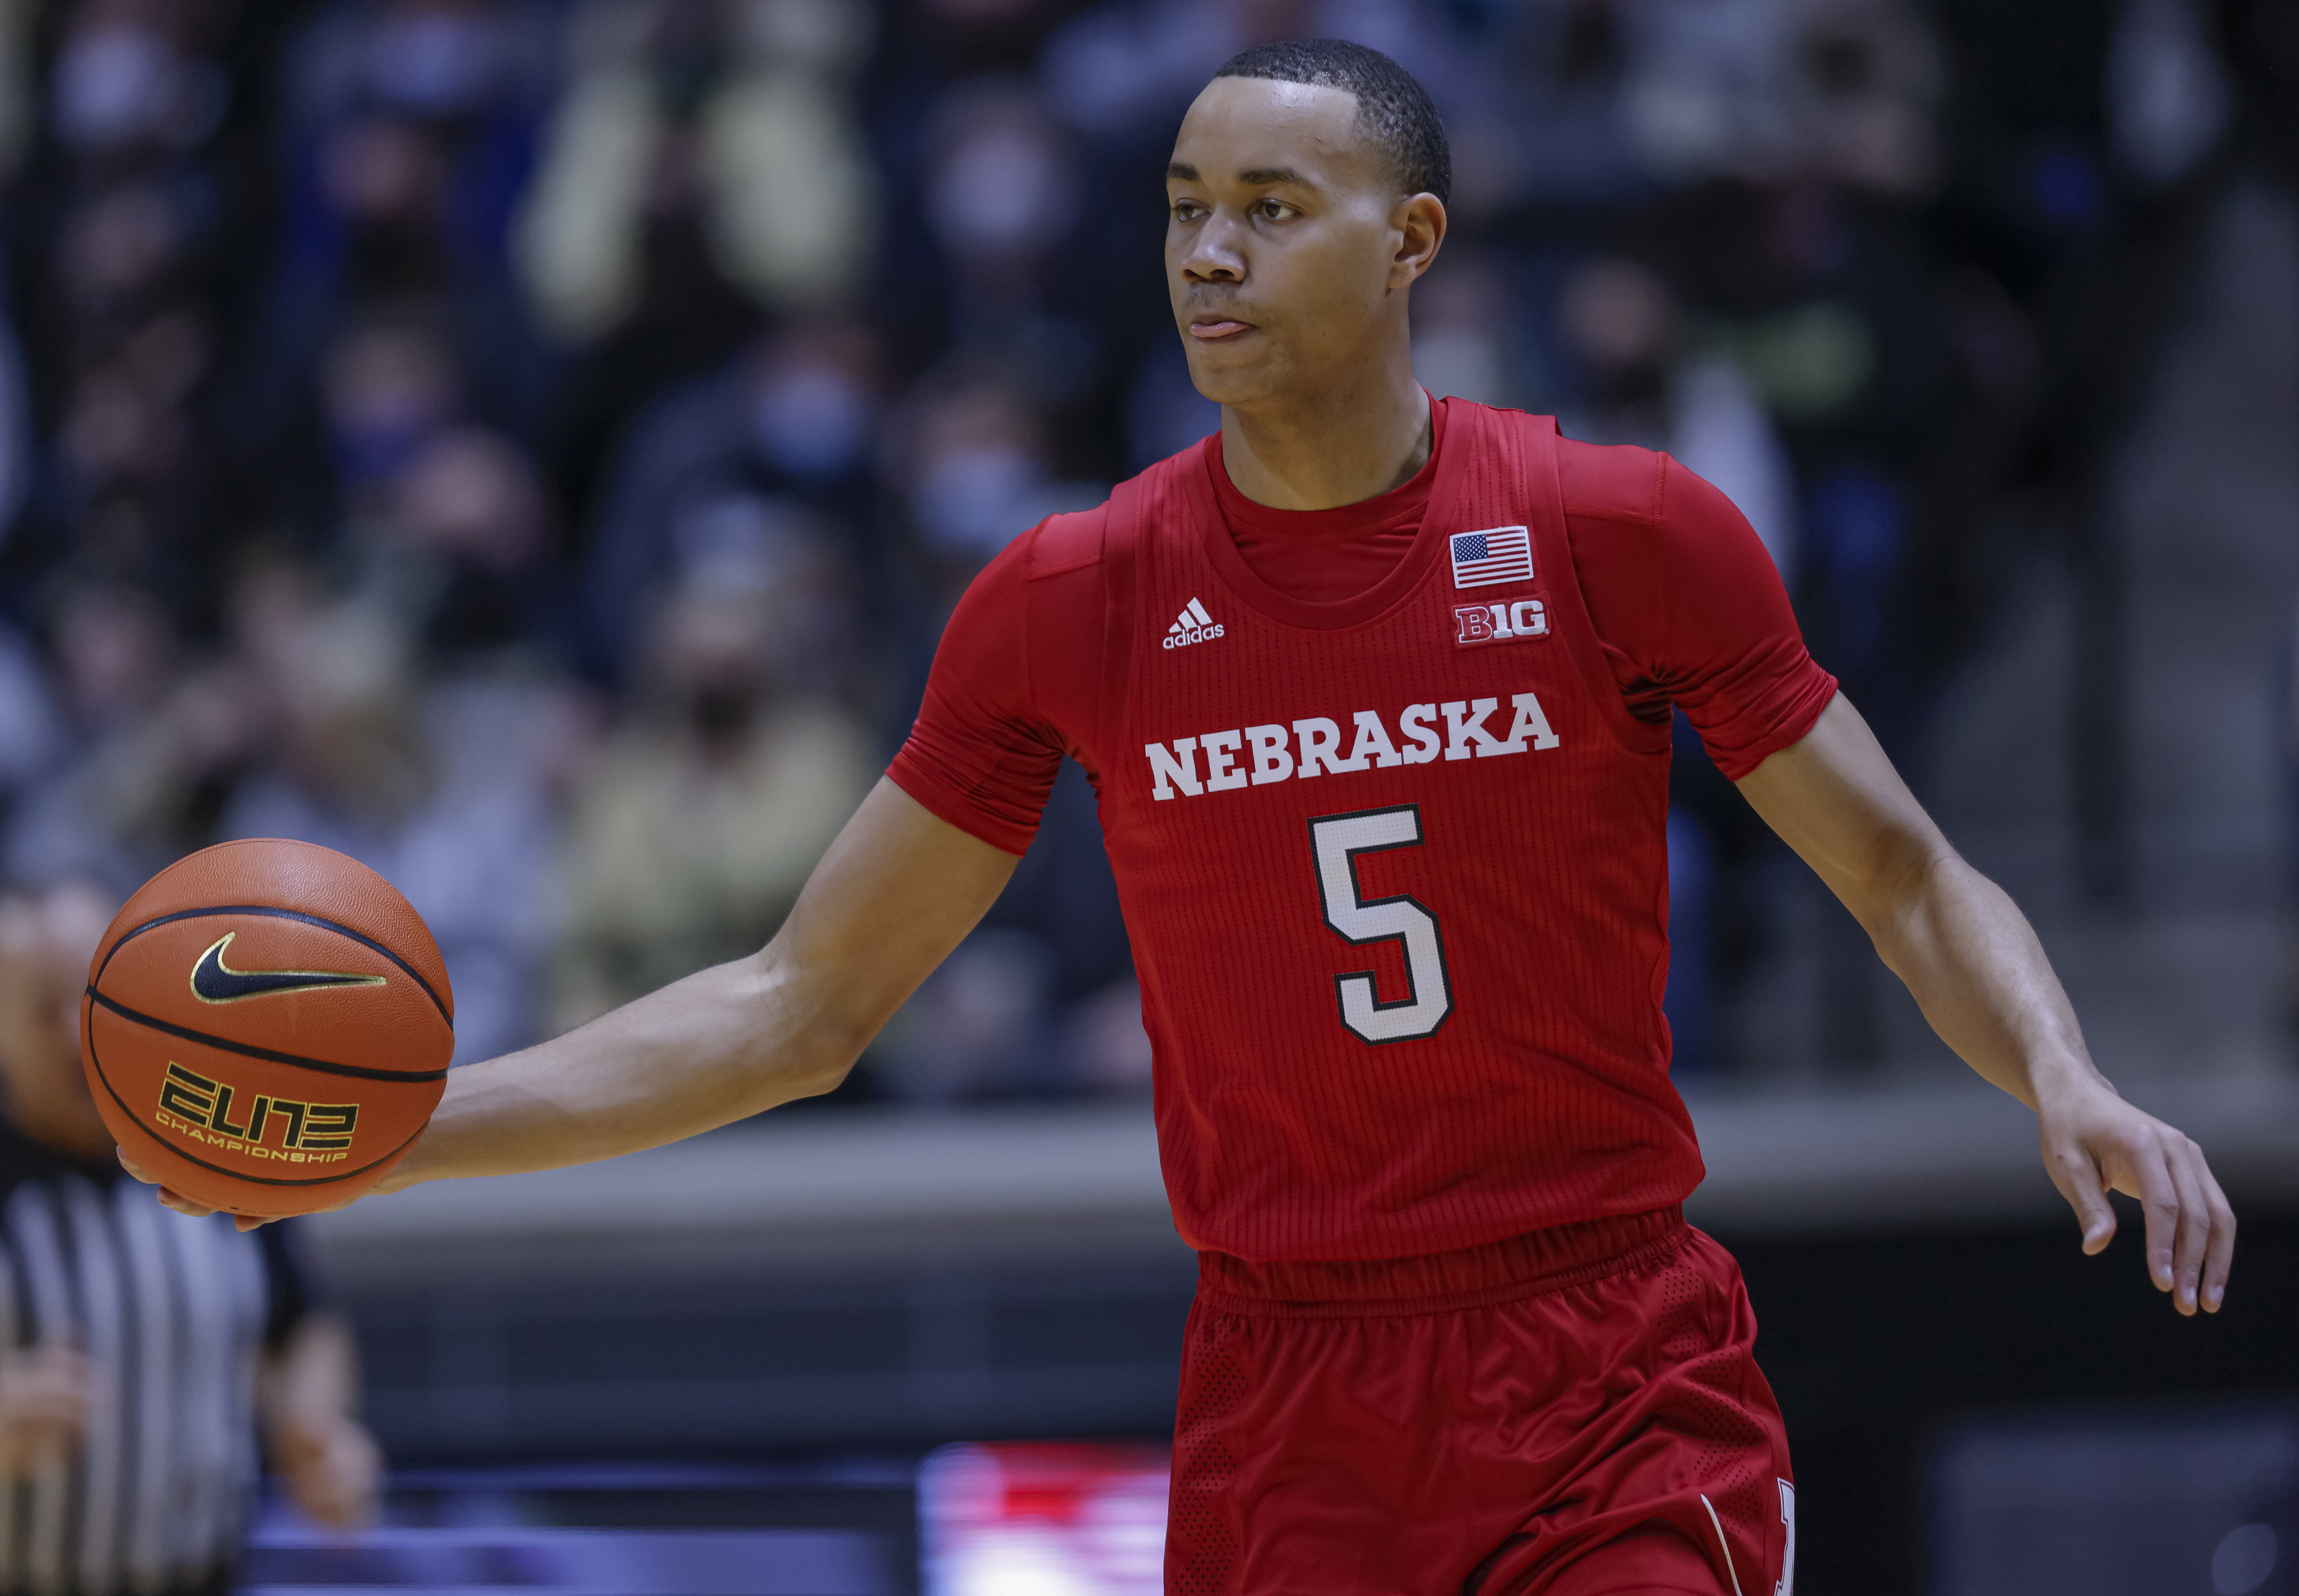 2022 NBA Draft profile: Nebraska's Bryce McGowens could be an upside pick  worth considering - Liberty Ballers